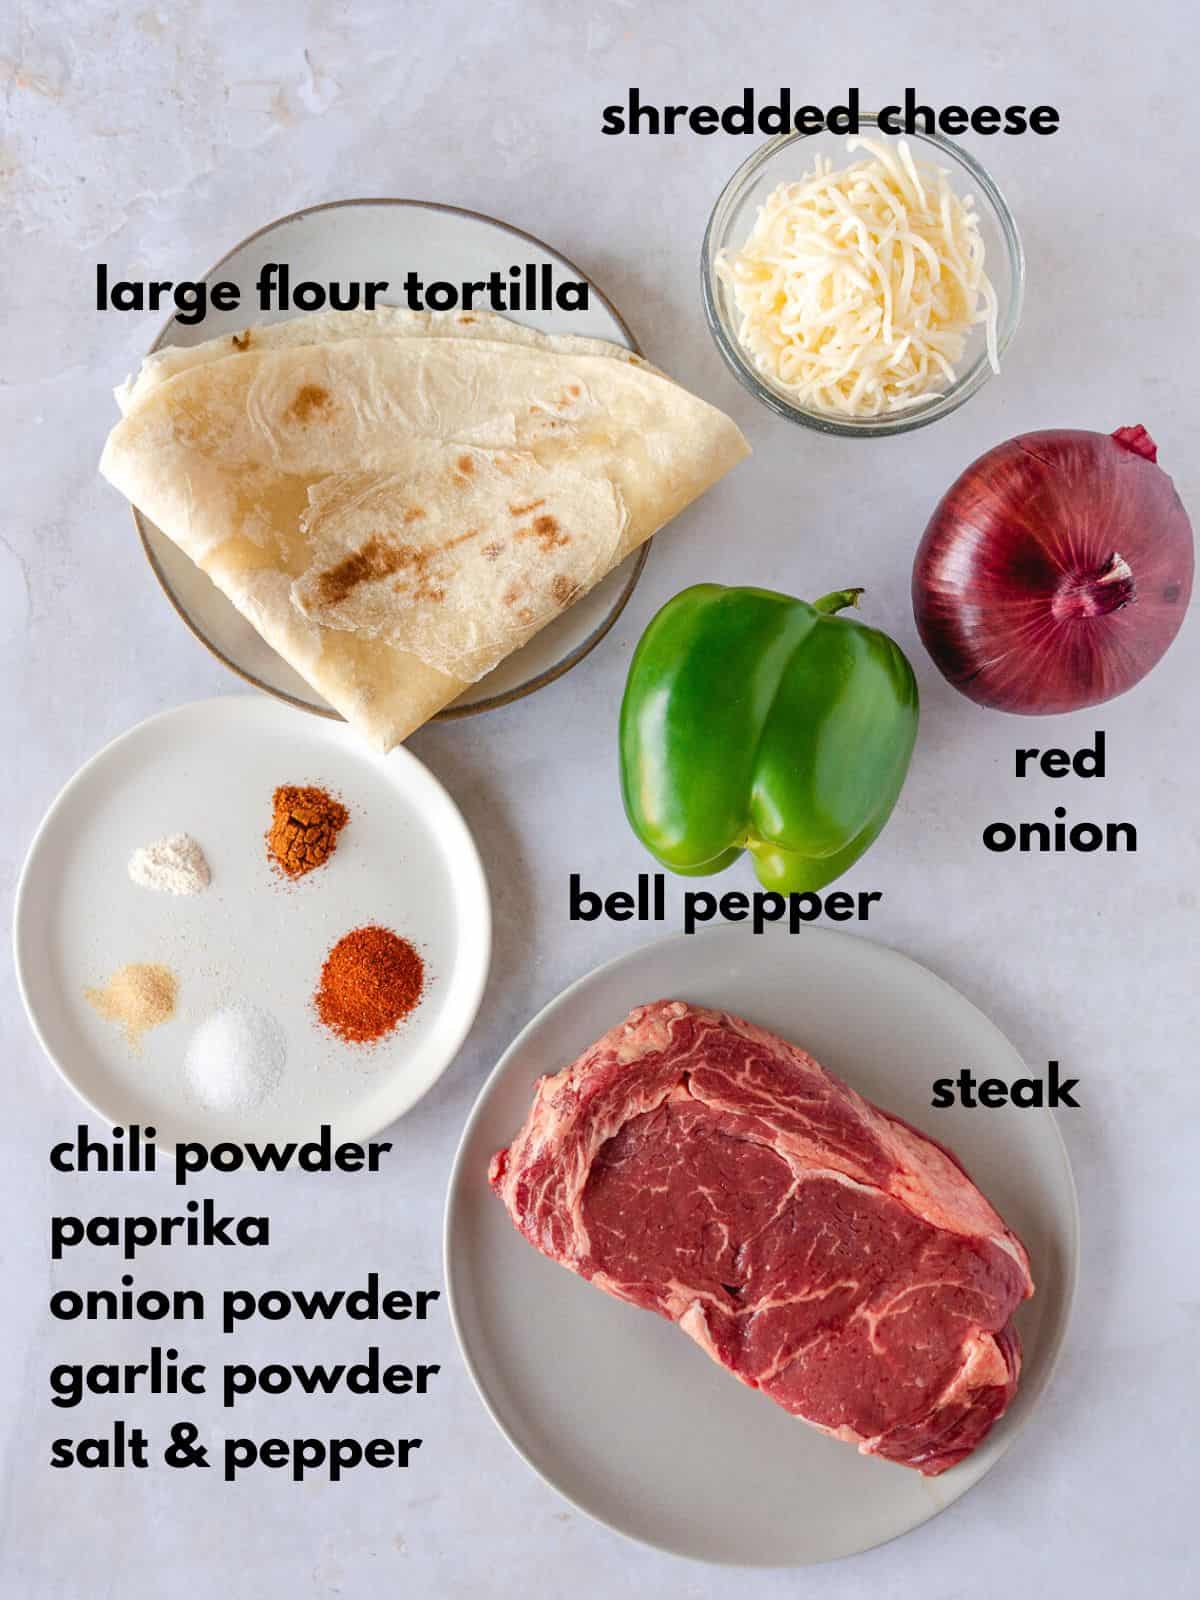 Ingredients labeled with text, shredded cheese, flour tortilla, bell pepper, red onion, steak, and seasoning.